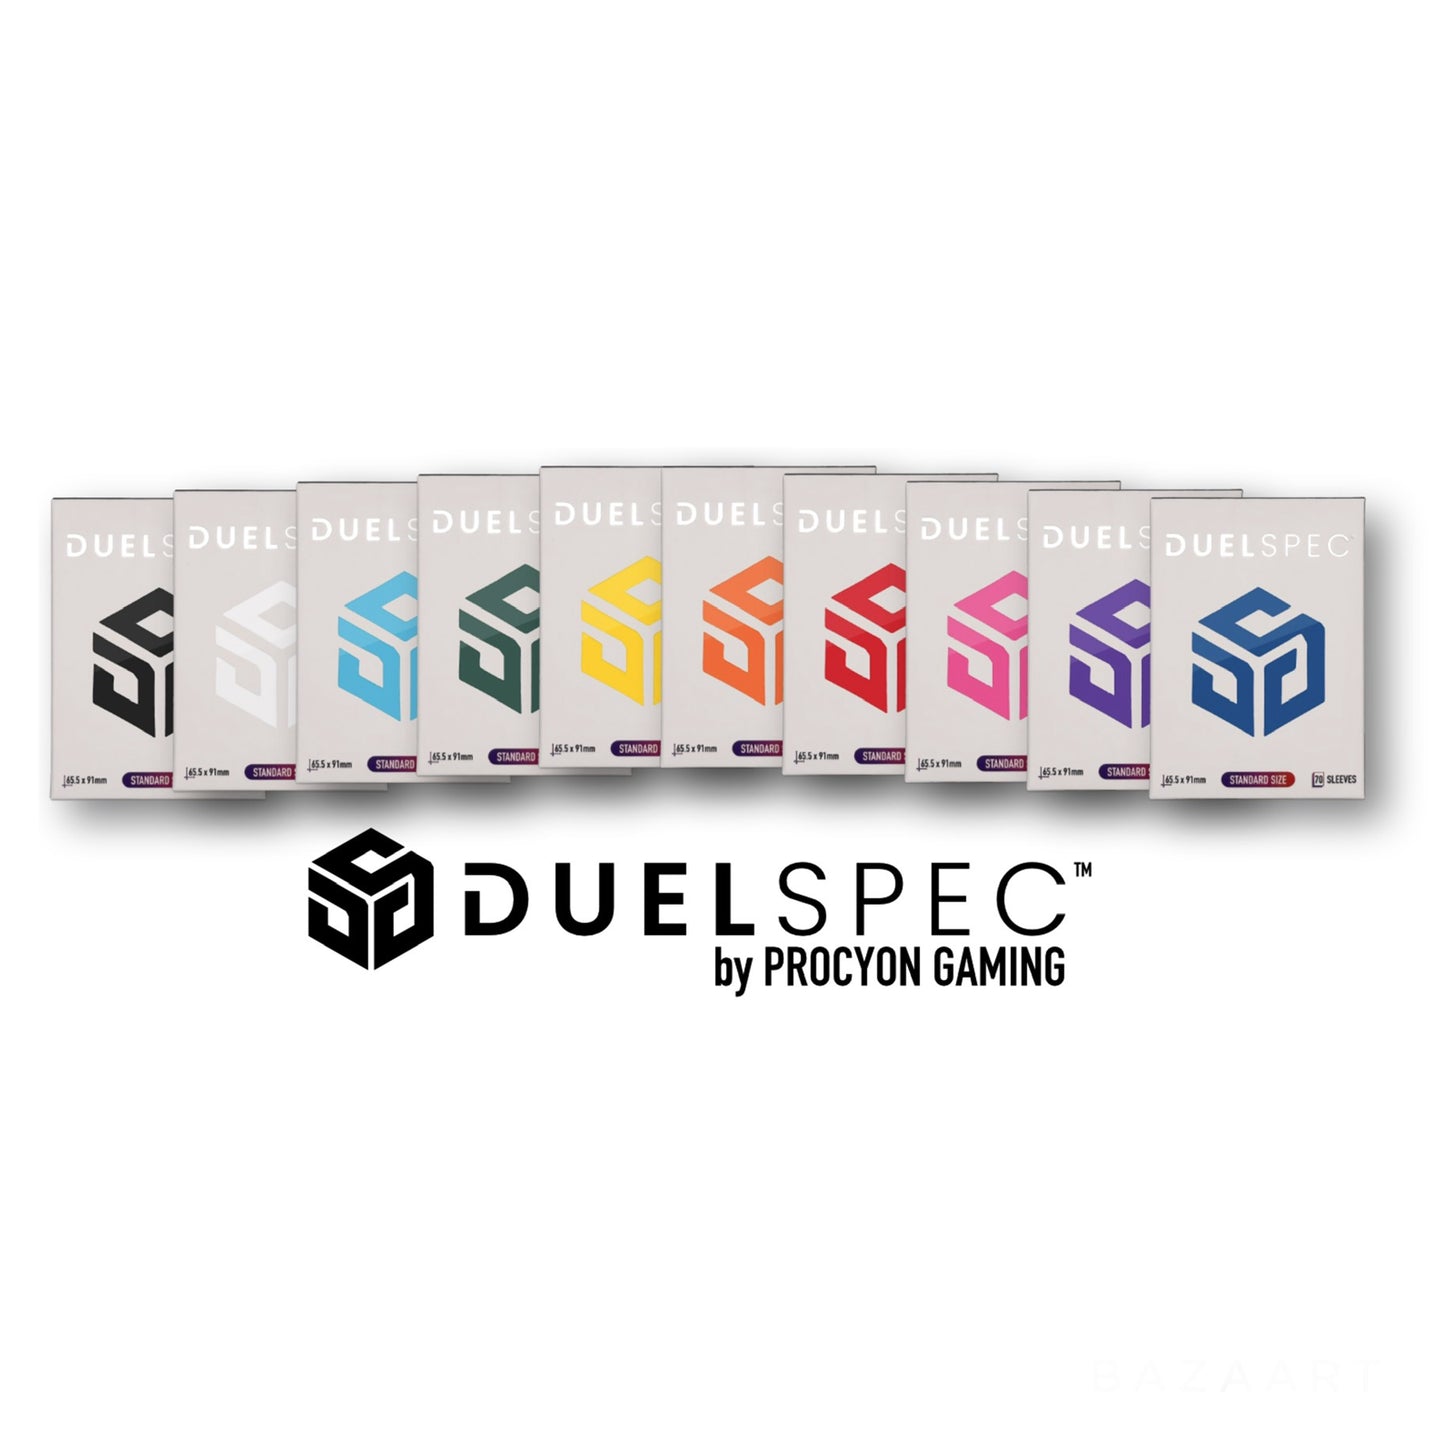 DuelSpec Competition Sleeves